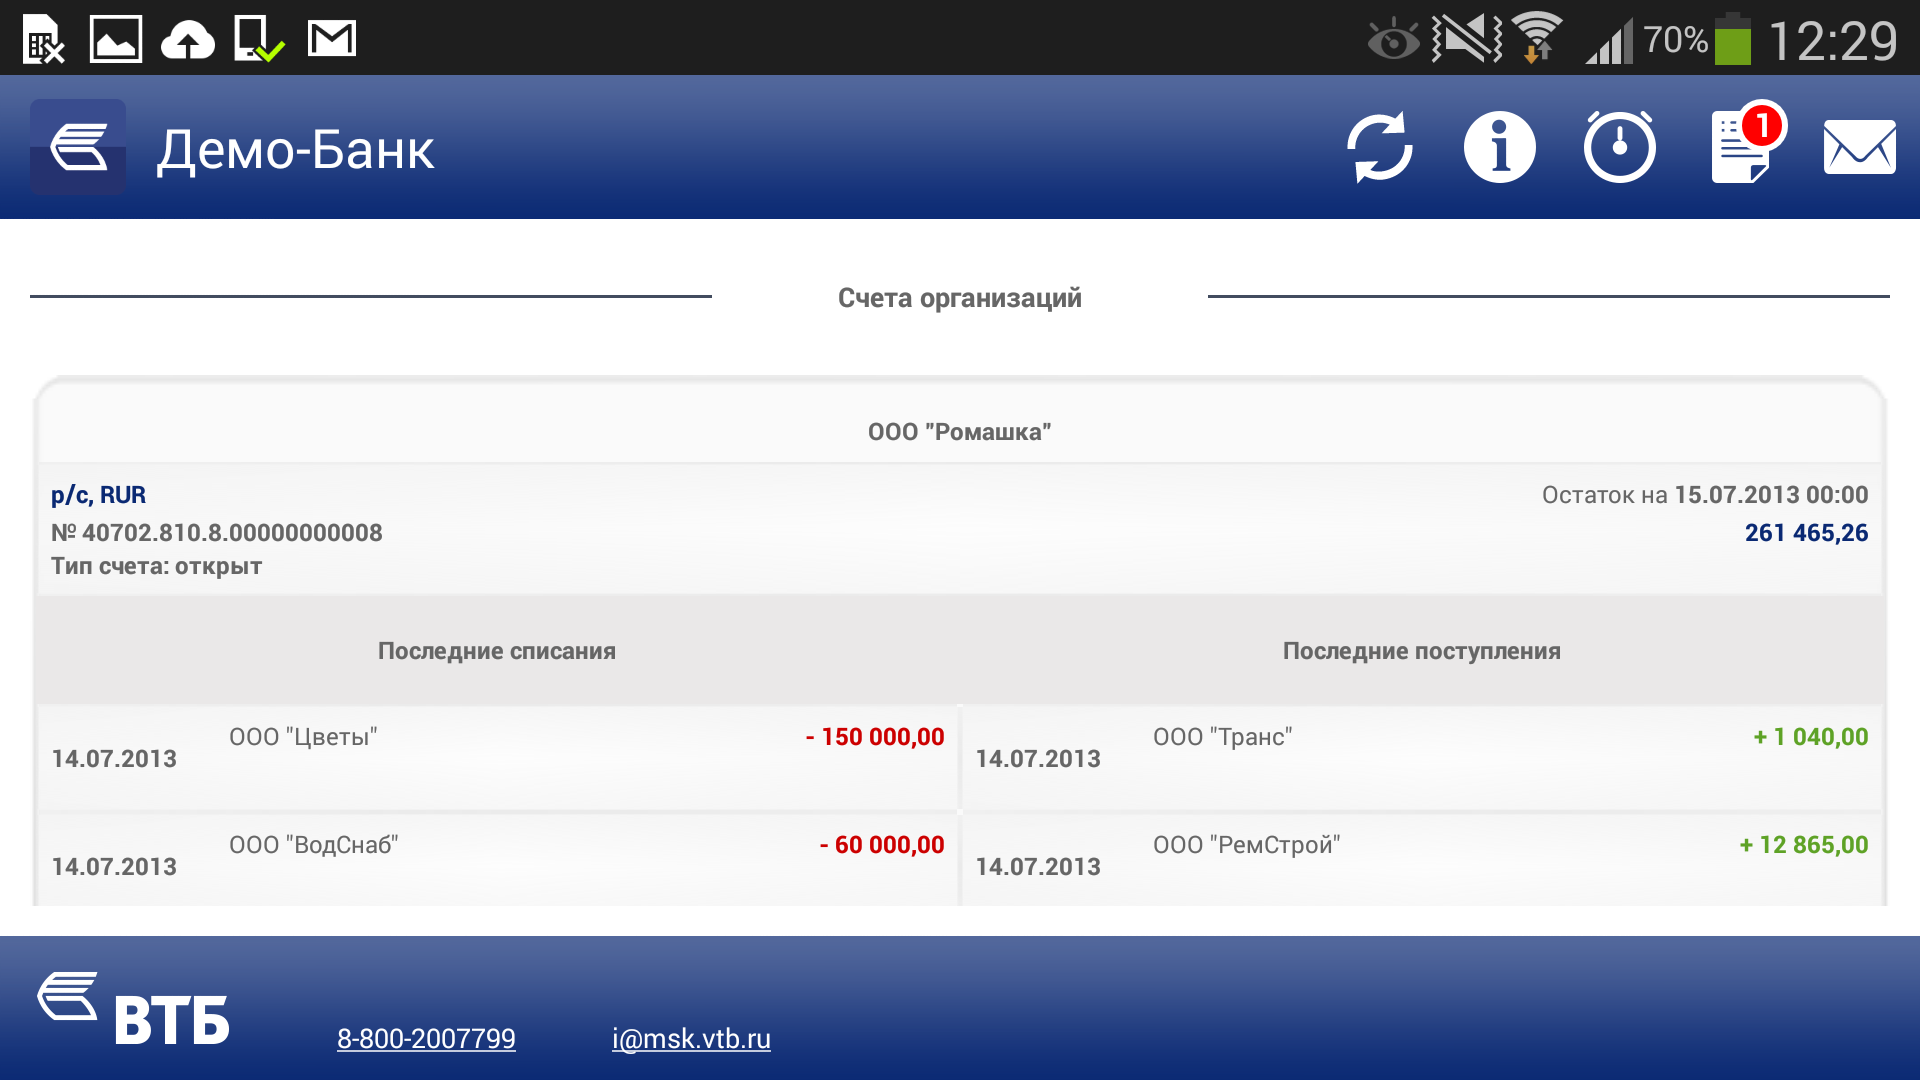 Android application Mobile Client VTB screenshort